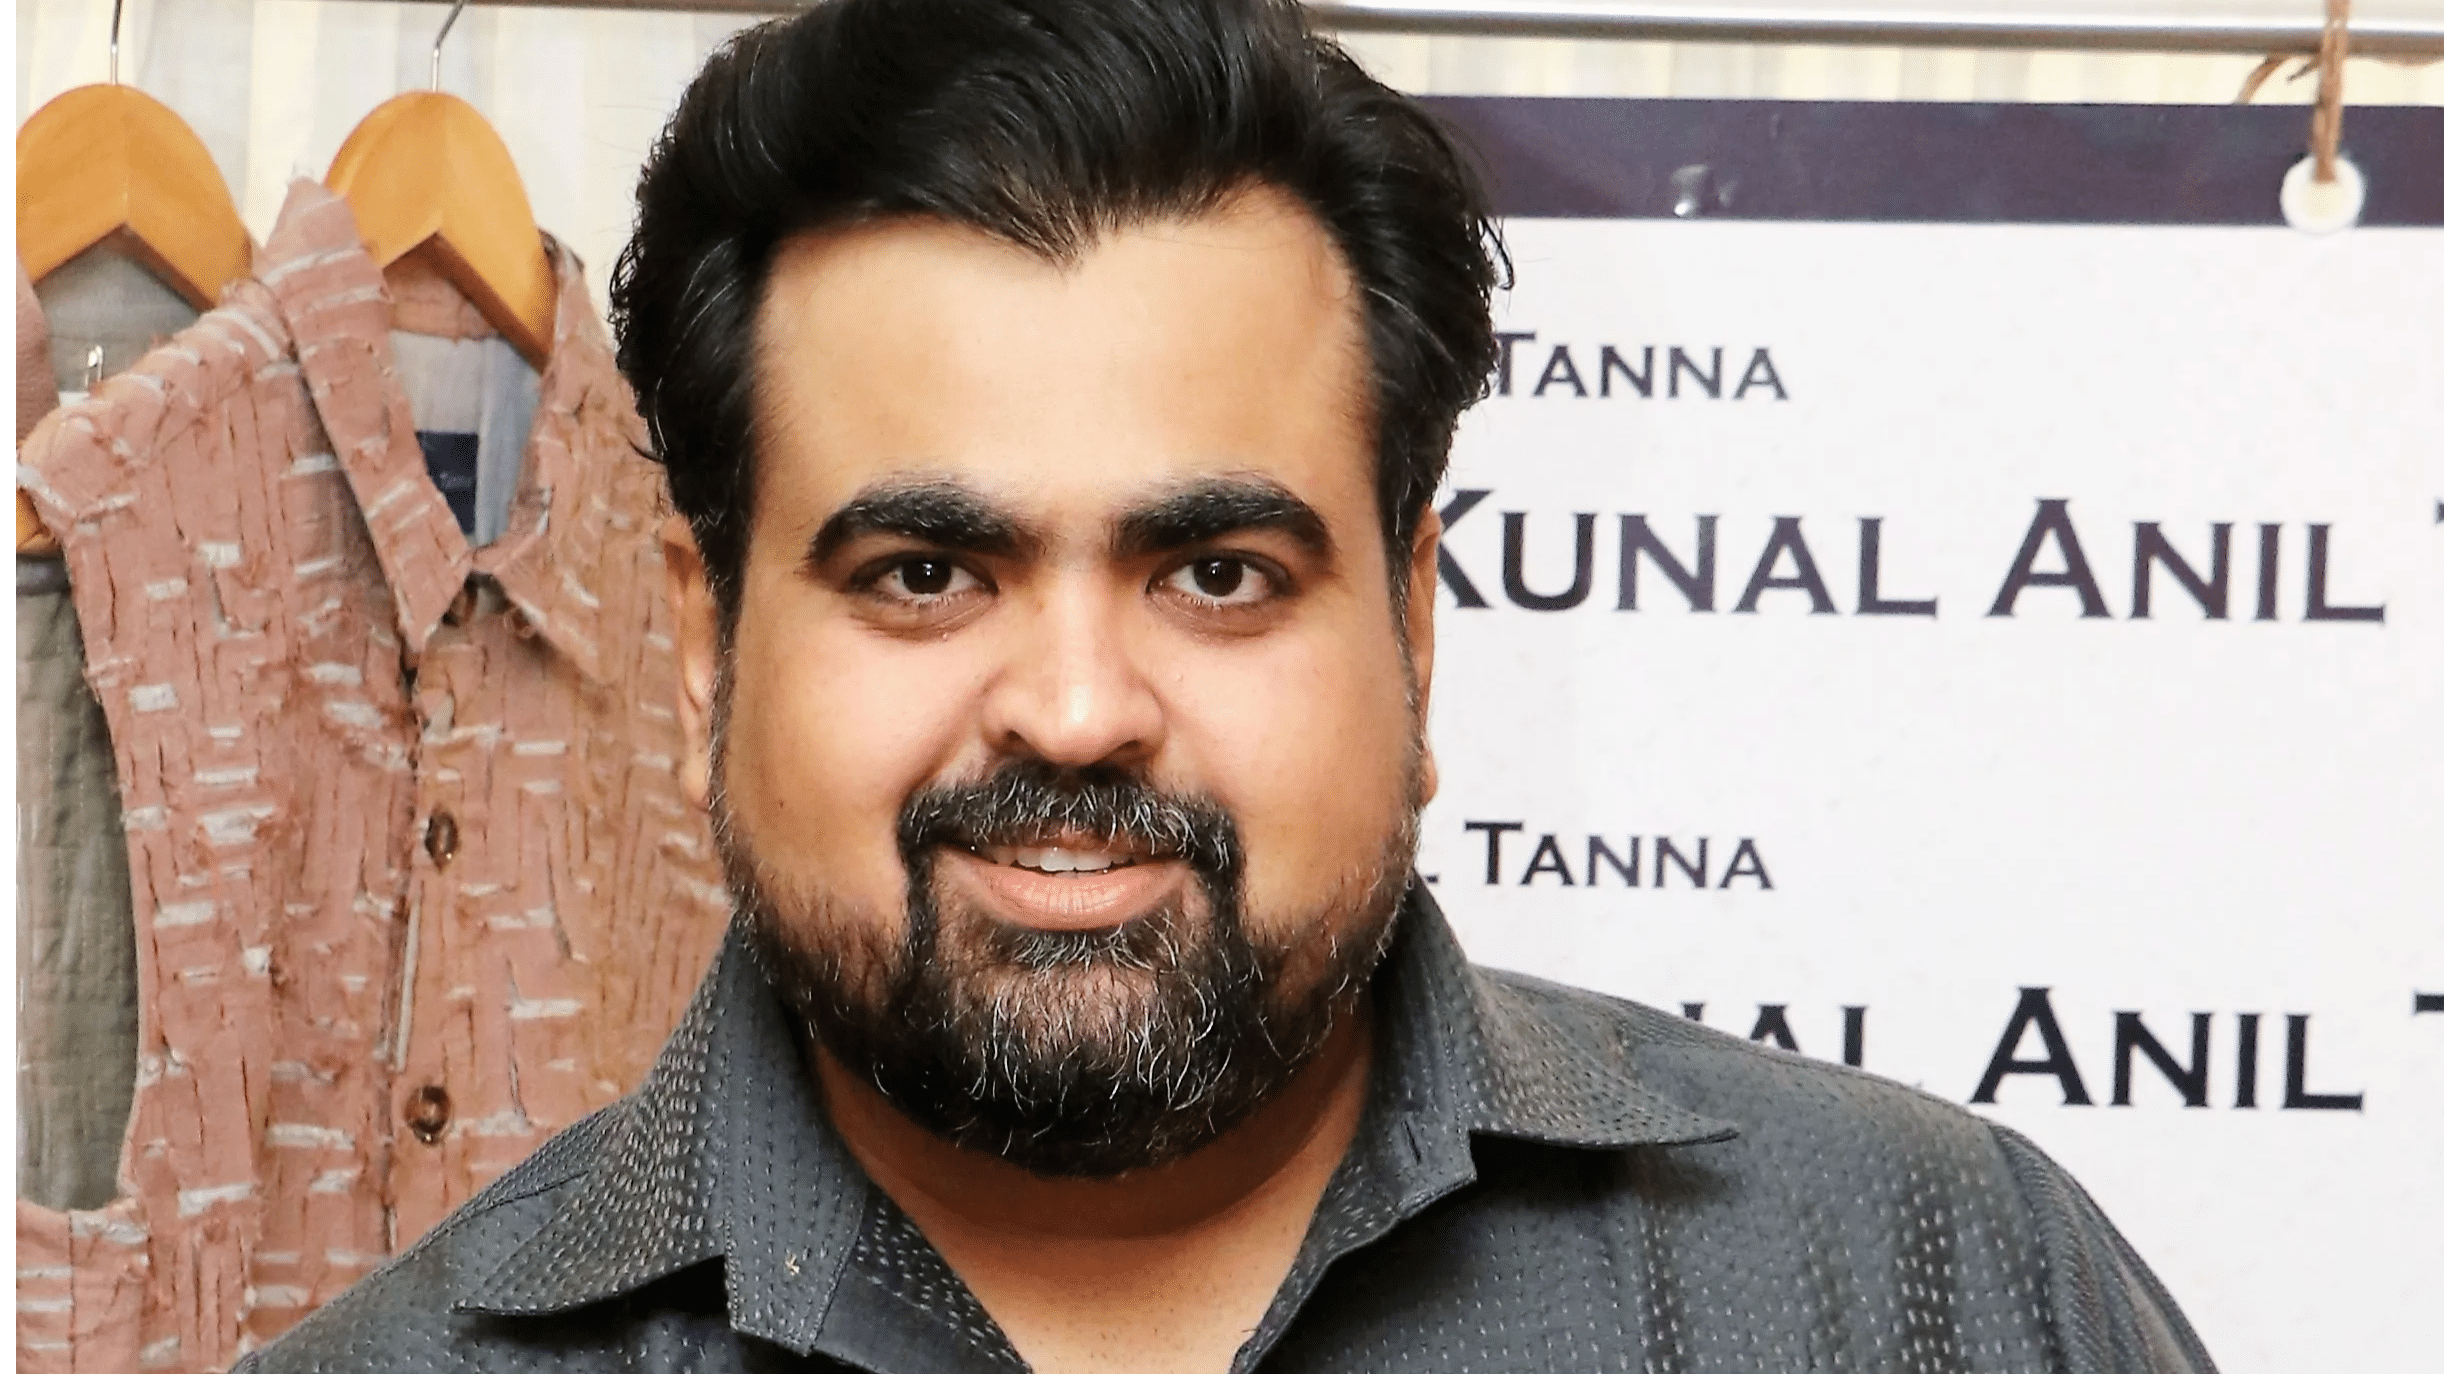 Celebrity designer Kunal Anil Tanna on post-pandemic fashion: ‘Sustainability is the key